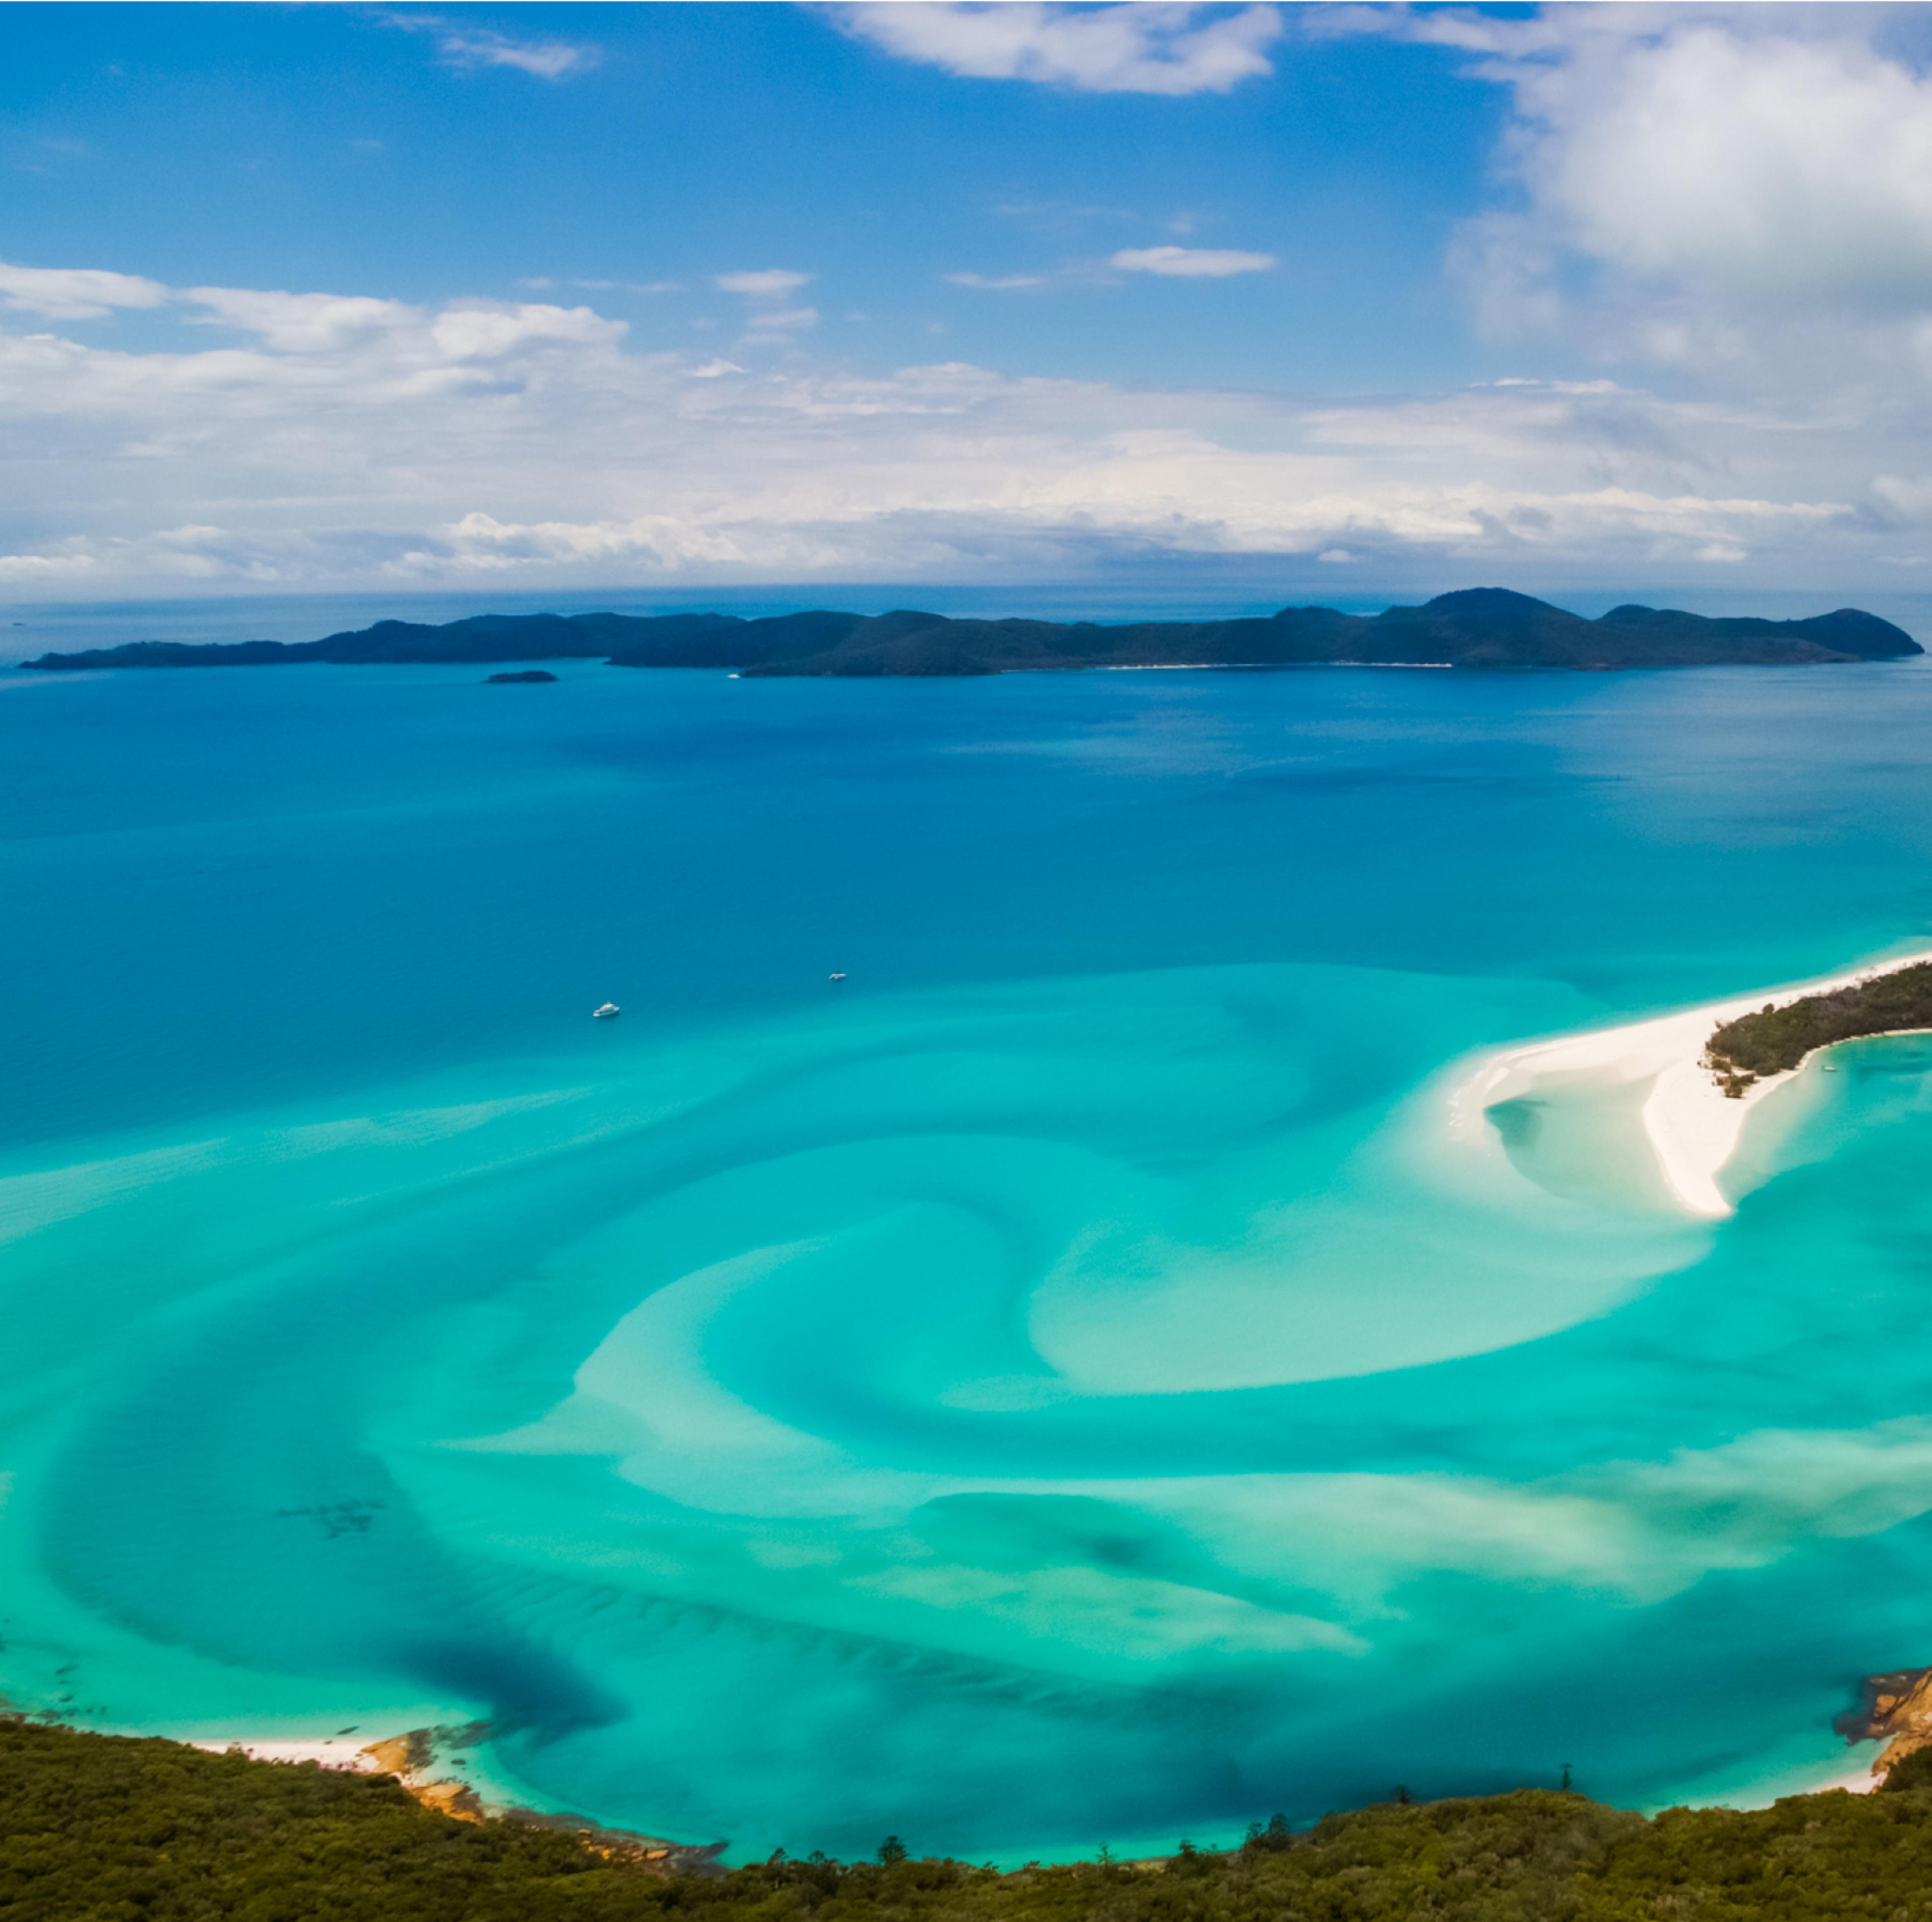 View of the ocean and Whitehaven beach in Australia